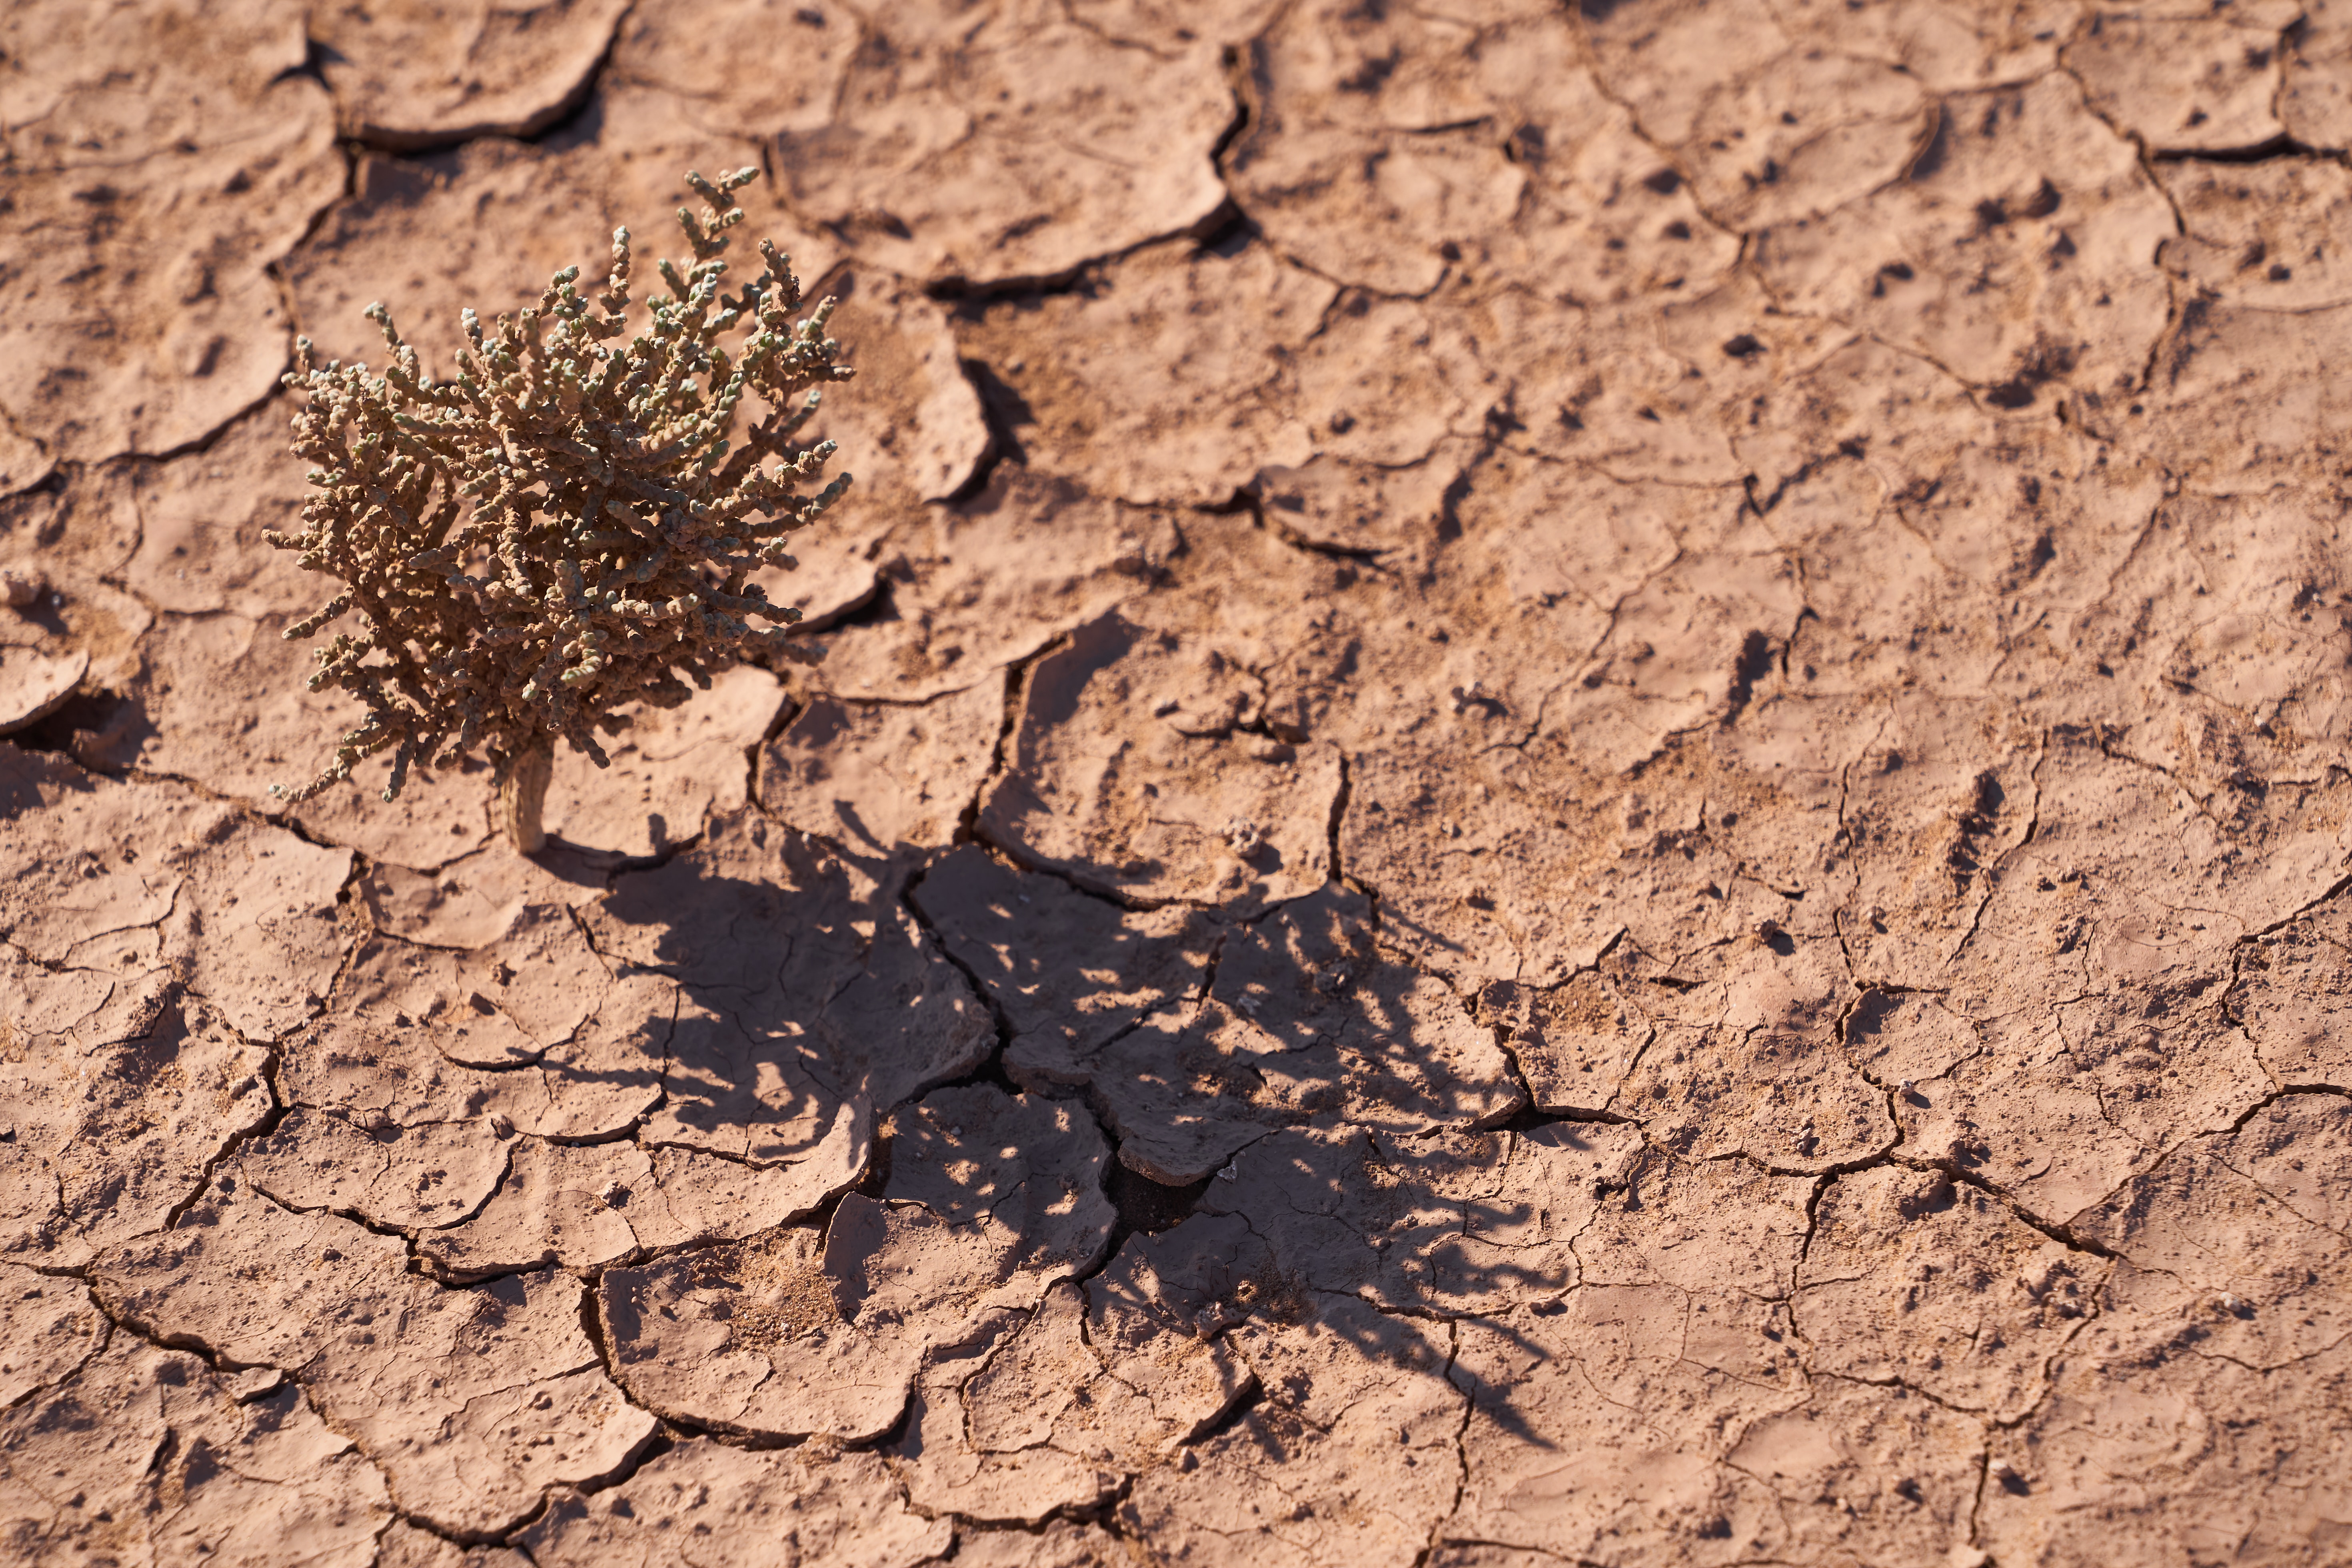 Dry, cracked soil with a solitary plant pushing through the ground.